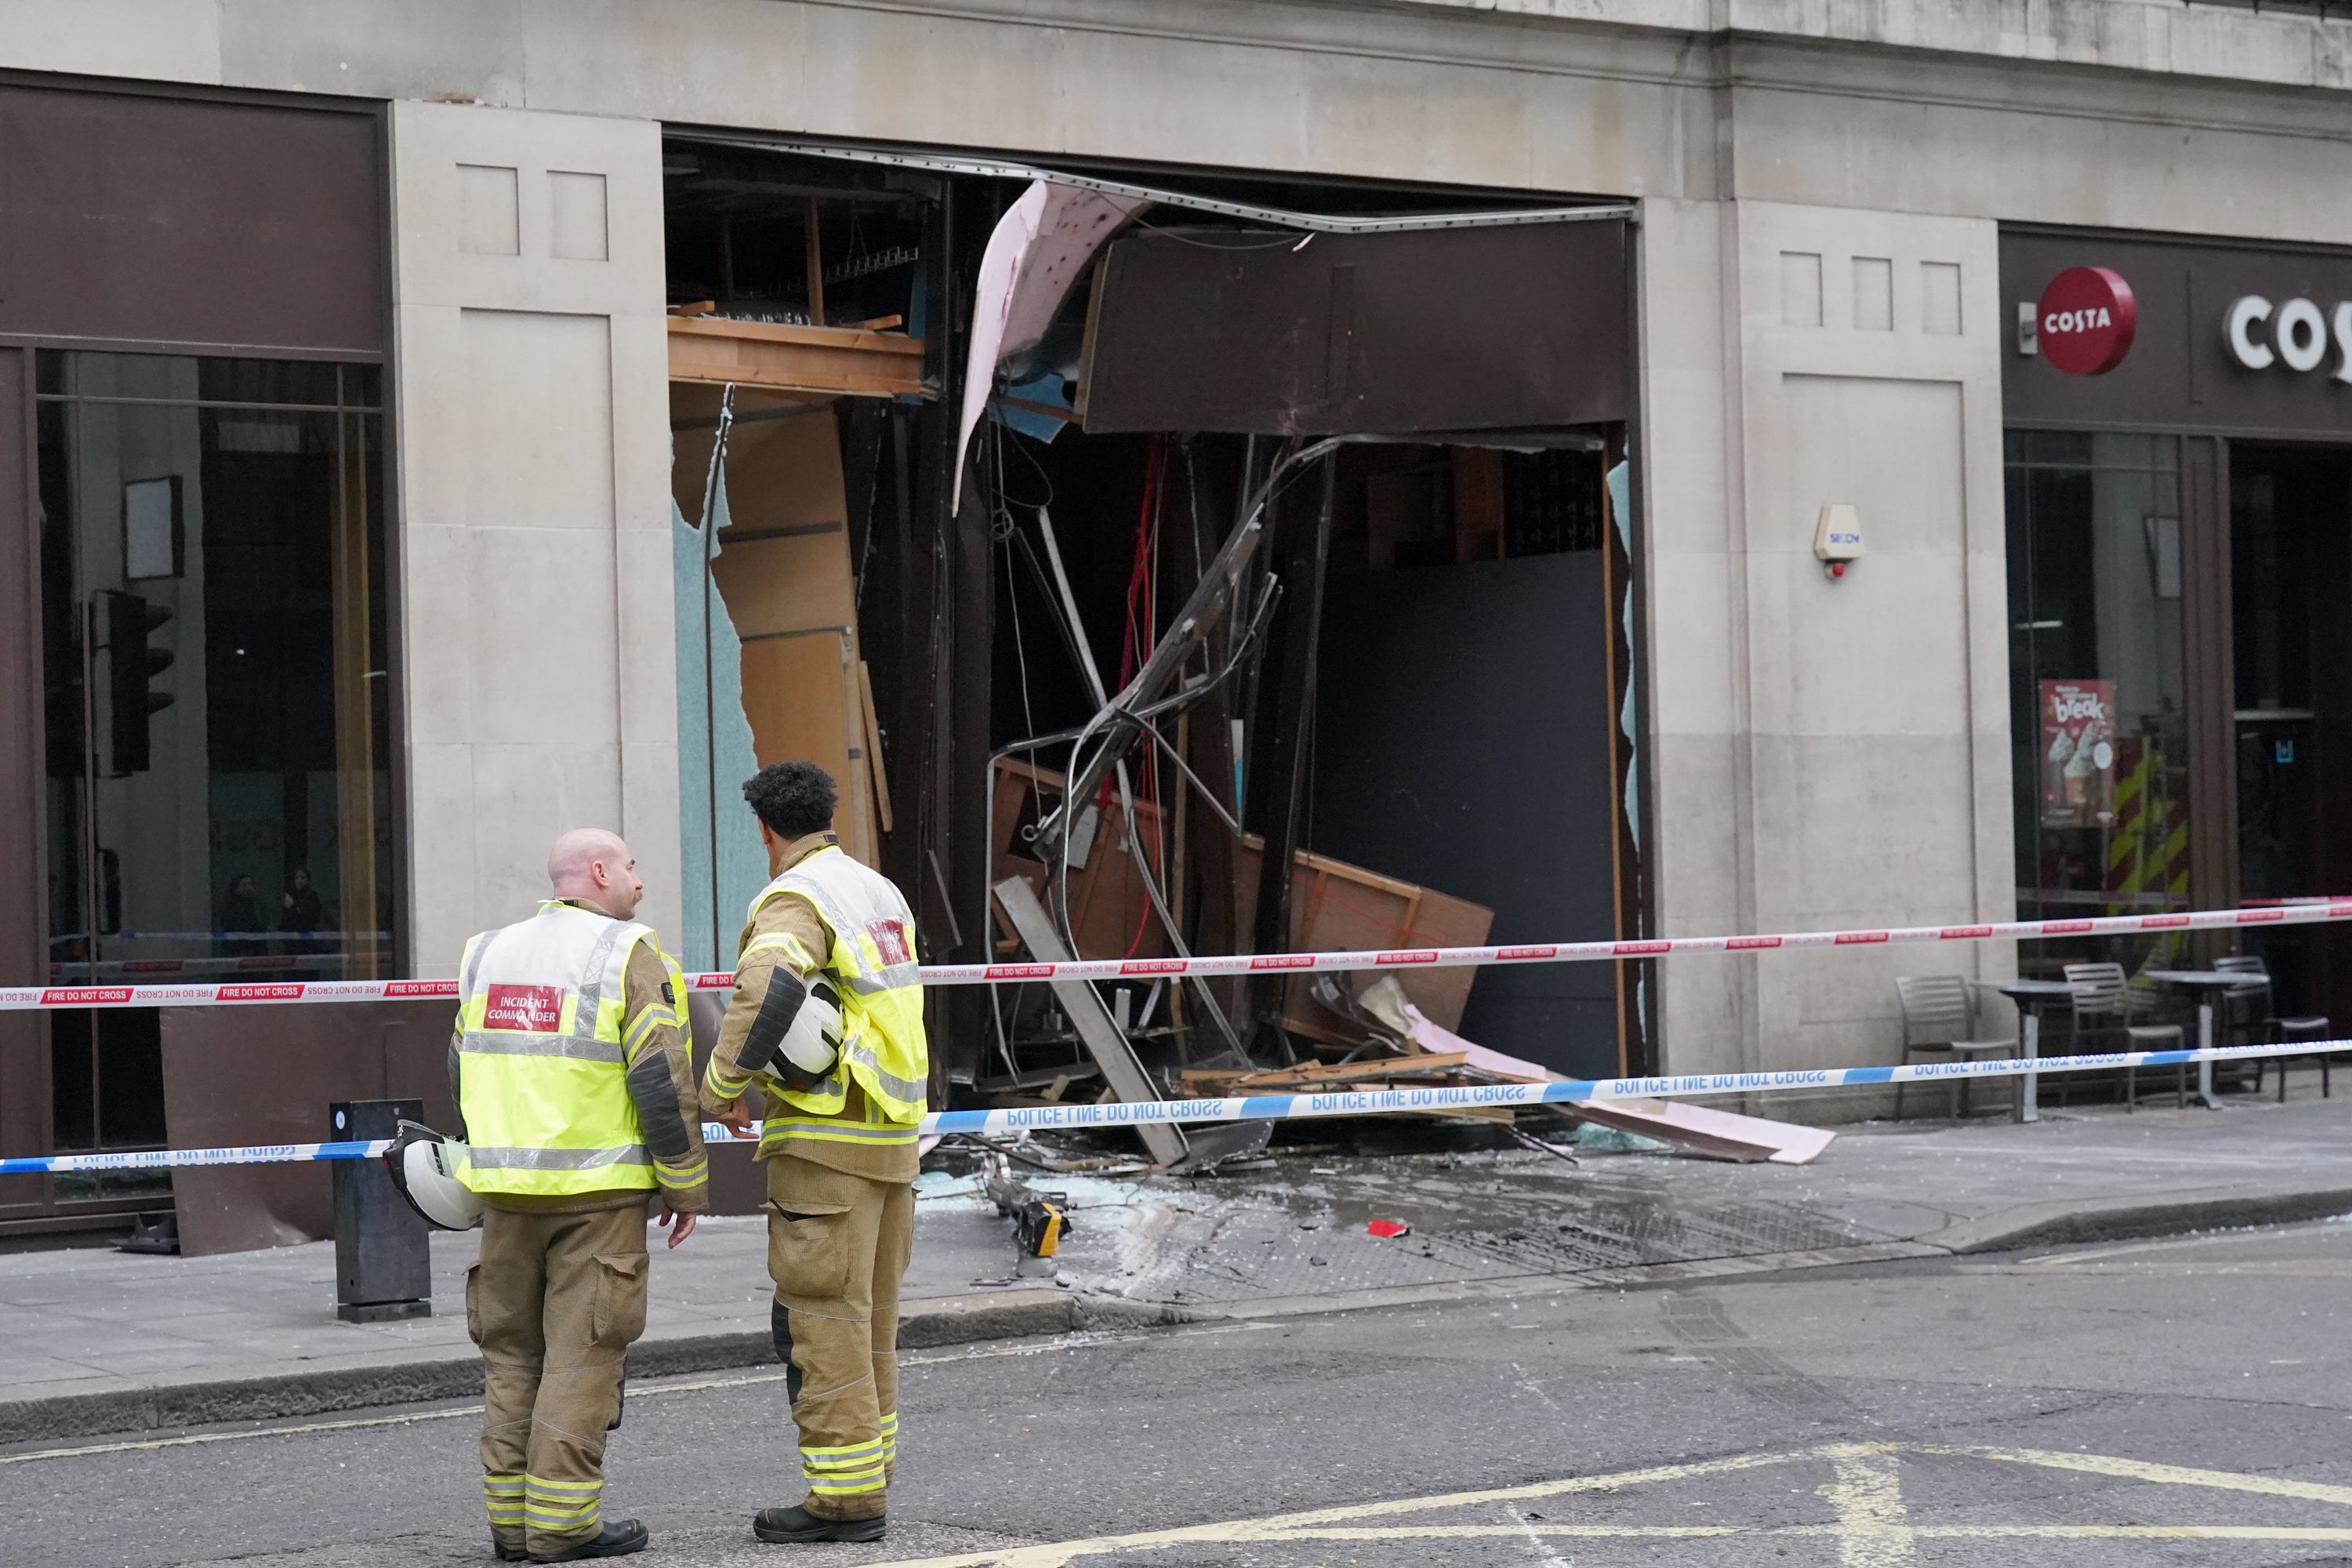 The damage left by the bus crashing into the building